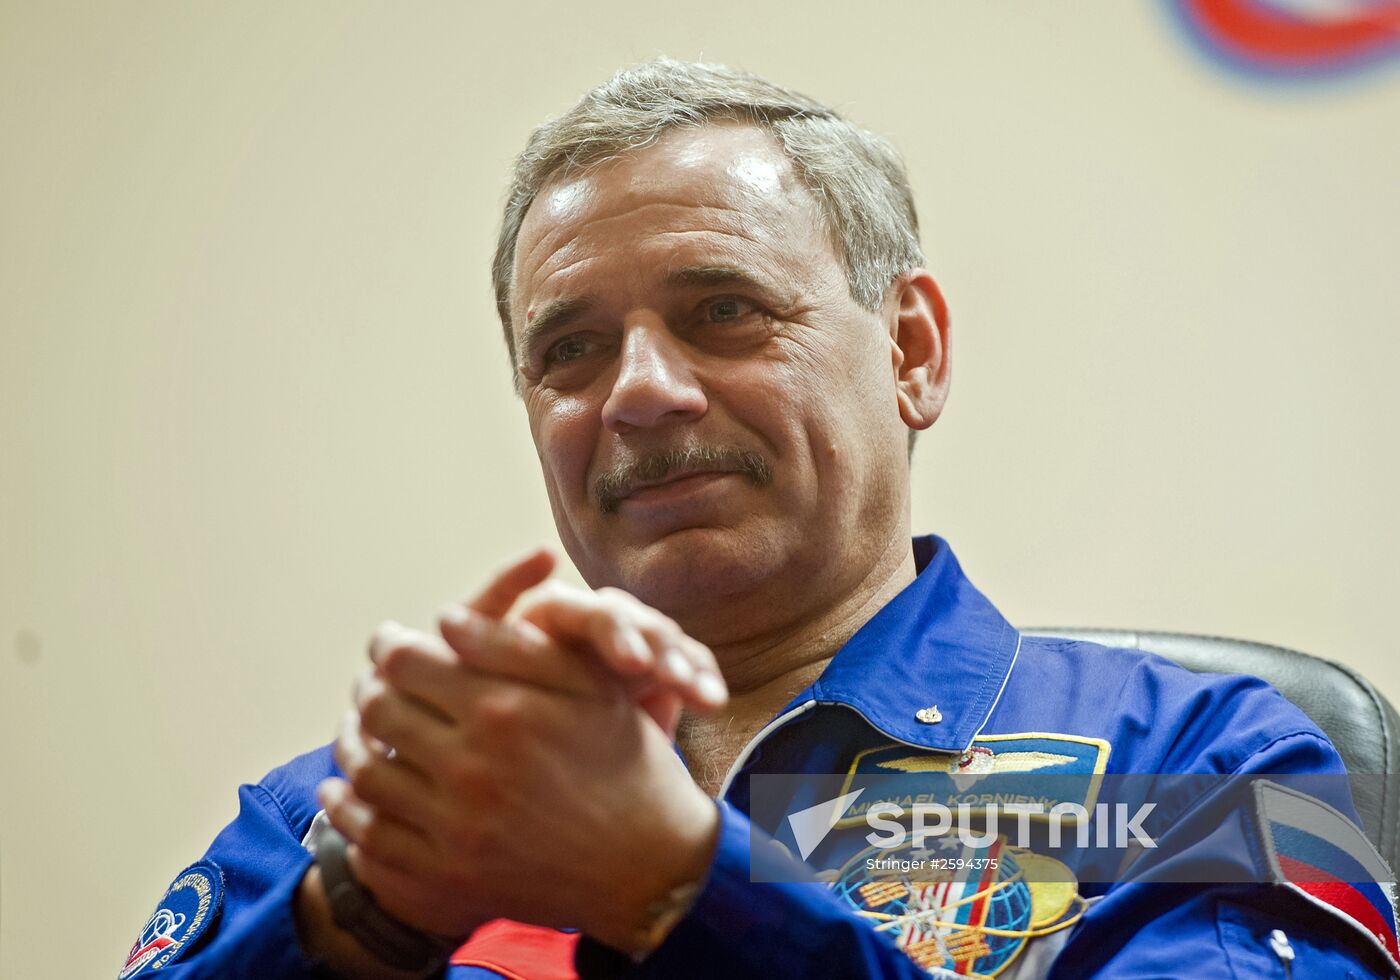 News conference of 43/44 ISS expedition crews